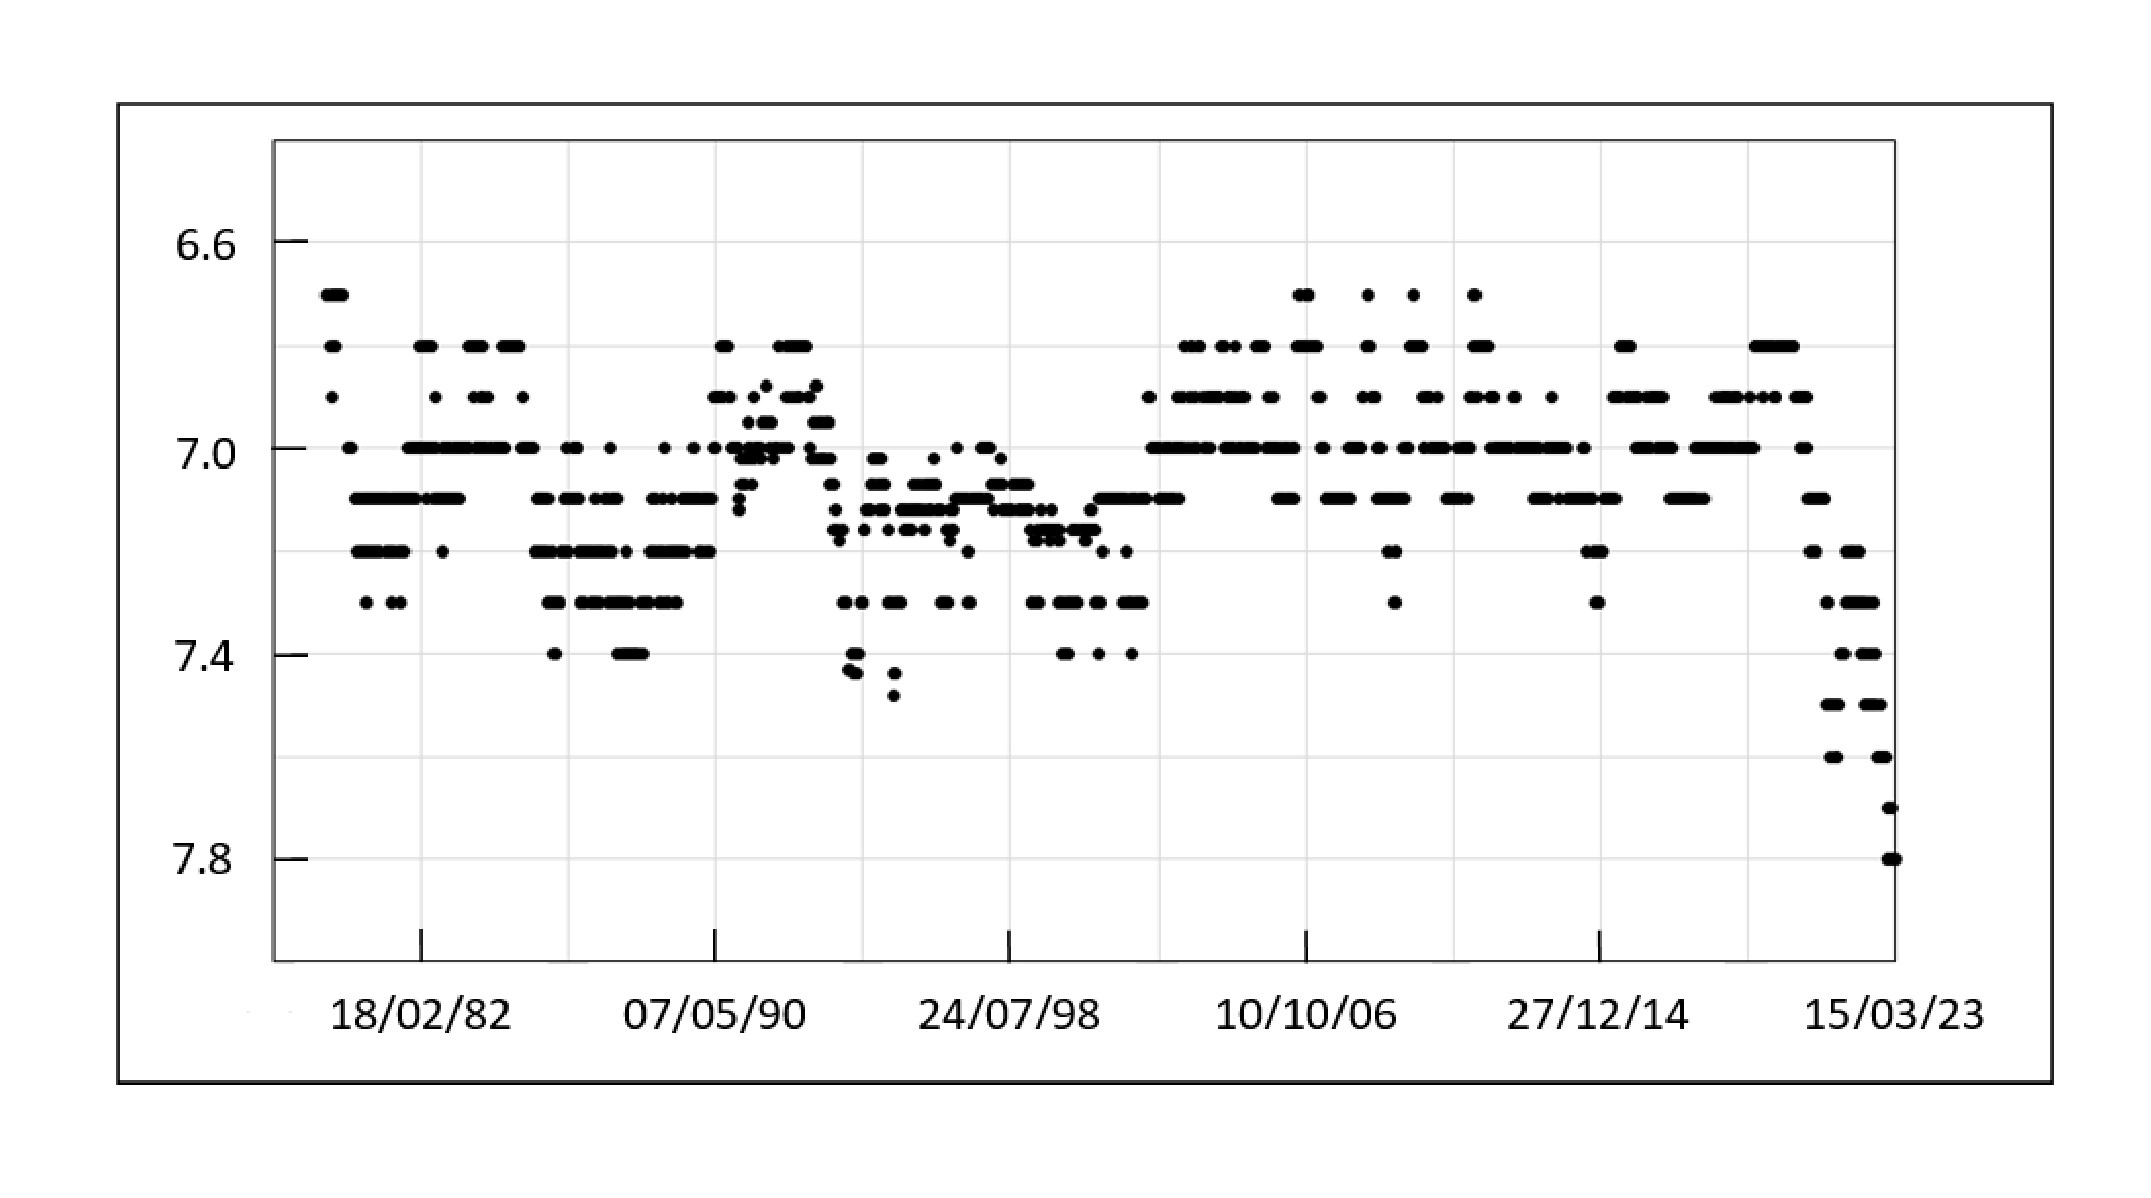 Light curve. Magnitude plotted against time. Periodic but showing variation in this and notable recent minimum